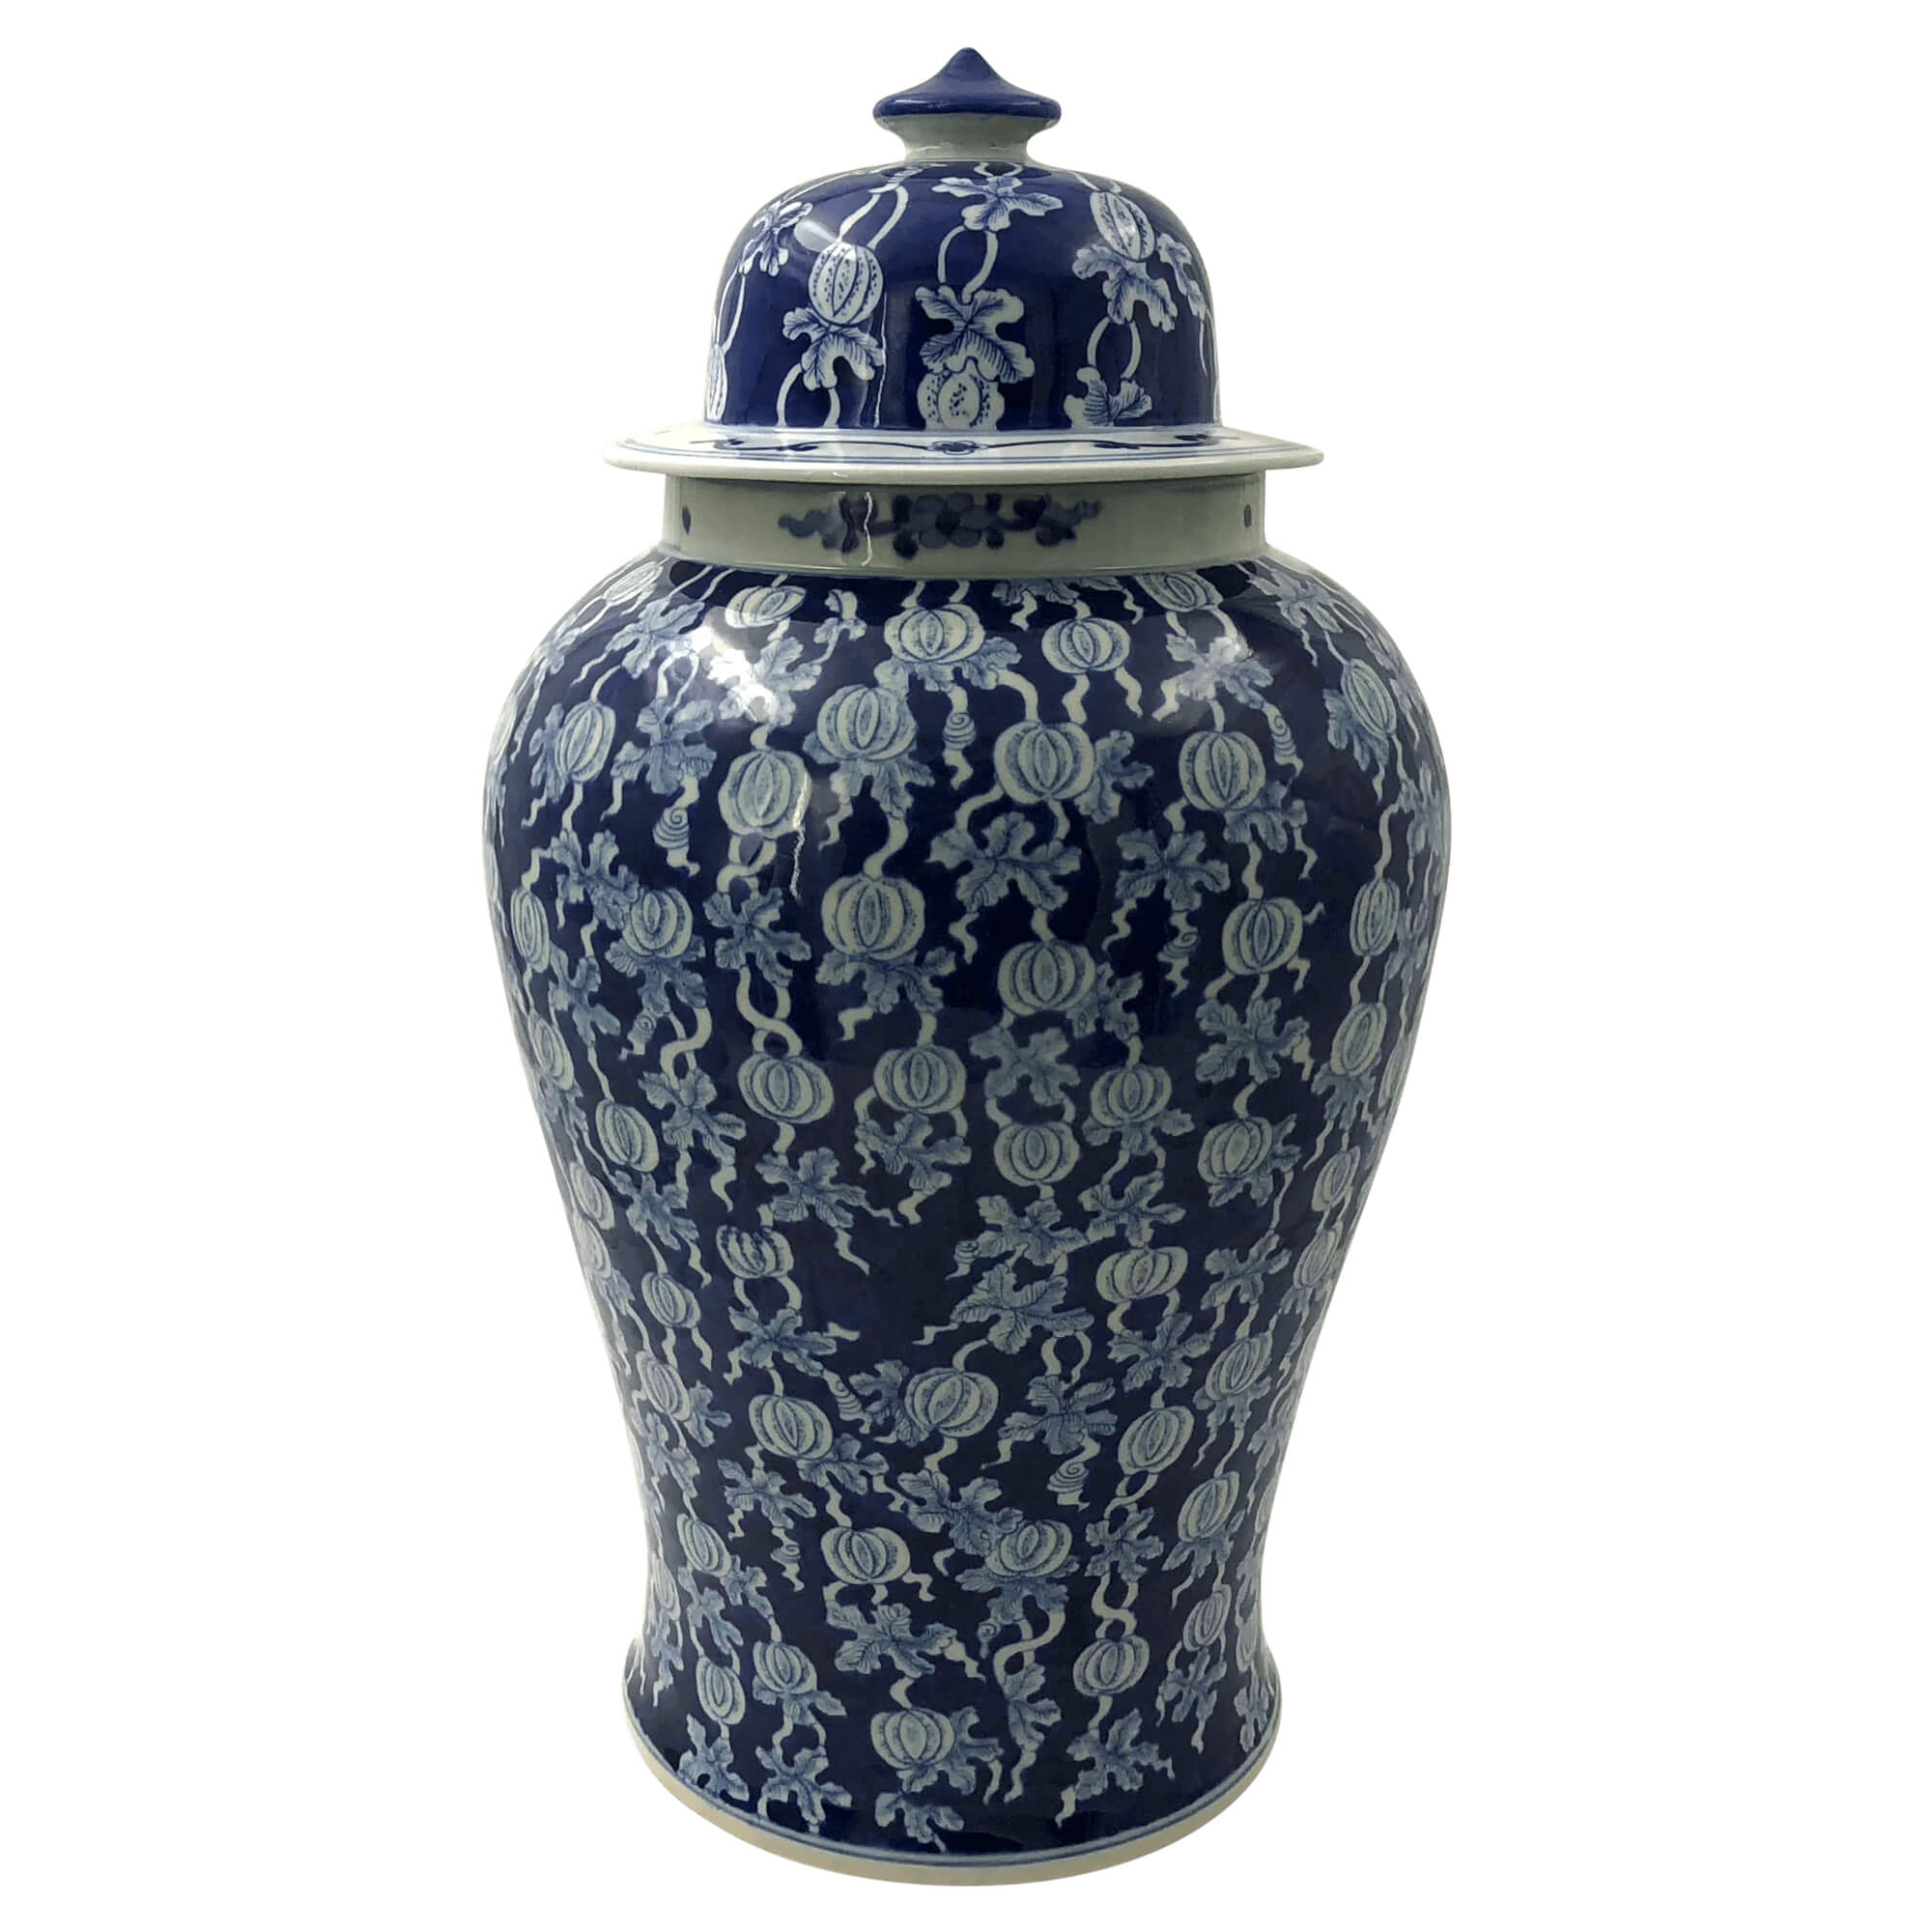 Pair of Hand Painted Blue and White Ginger Jars - English Georgian America